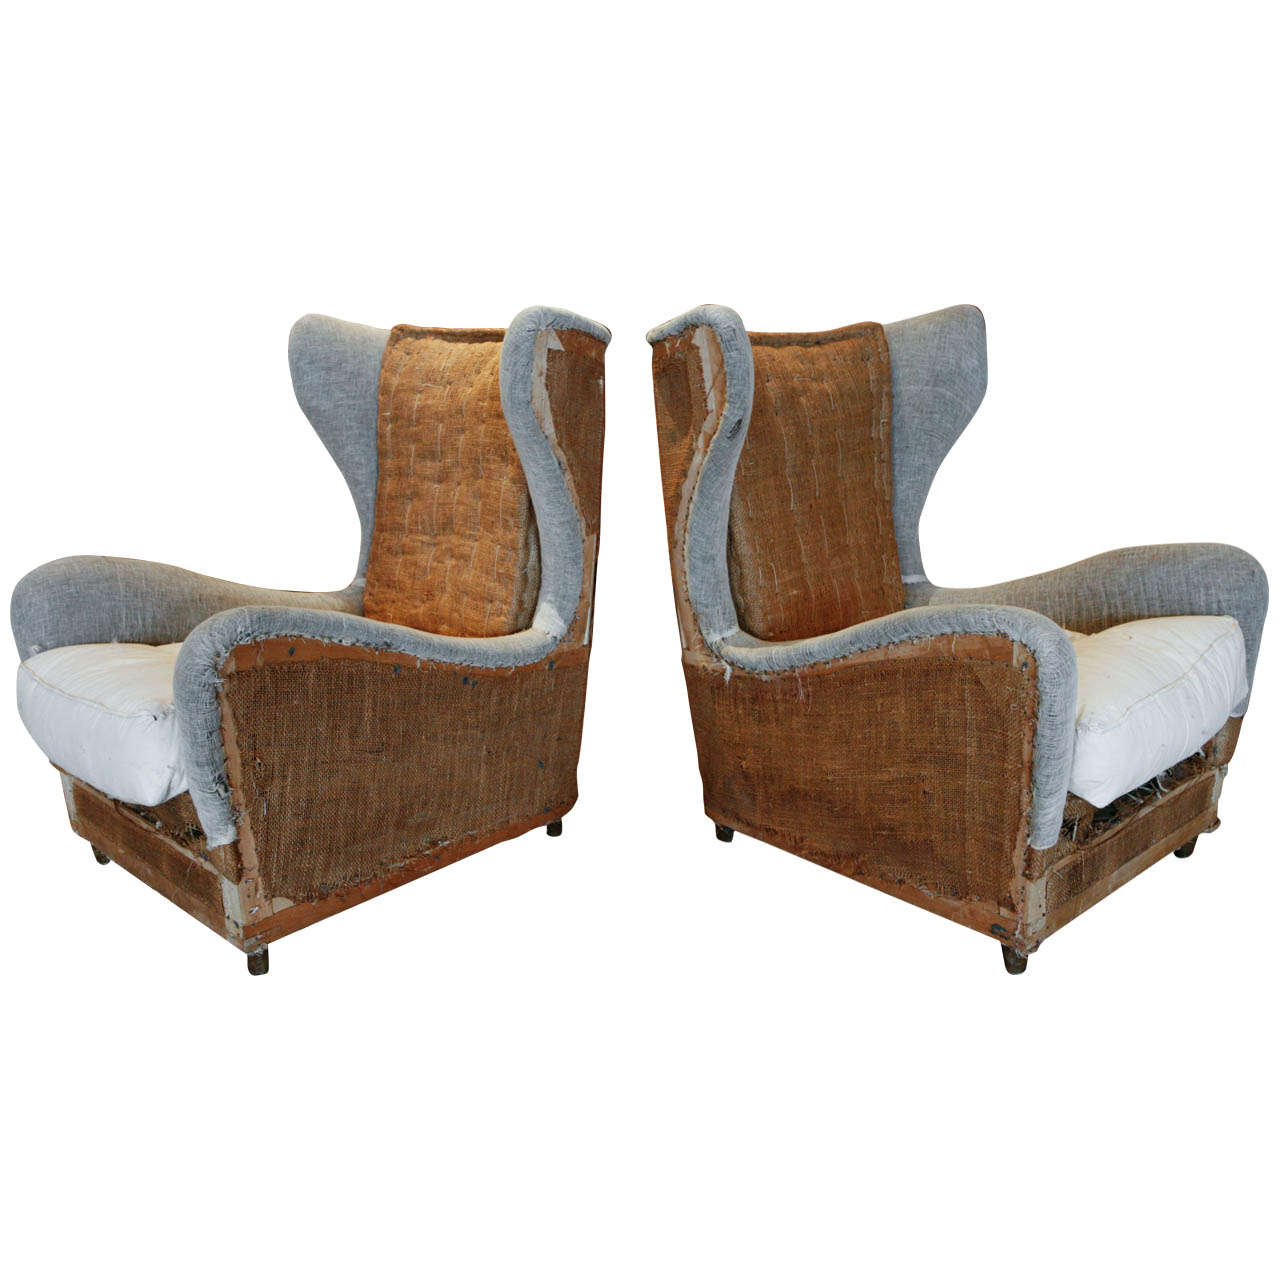 A Pair Of French Wingback Chairs, Late 19th Century